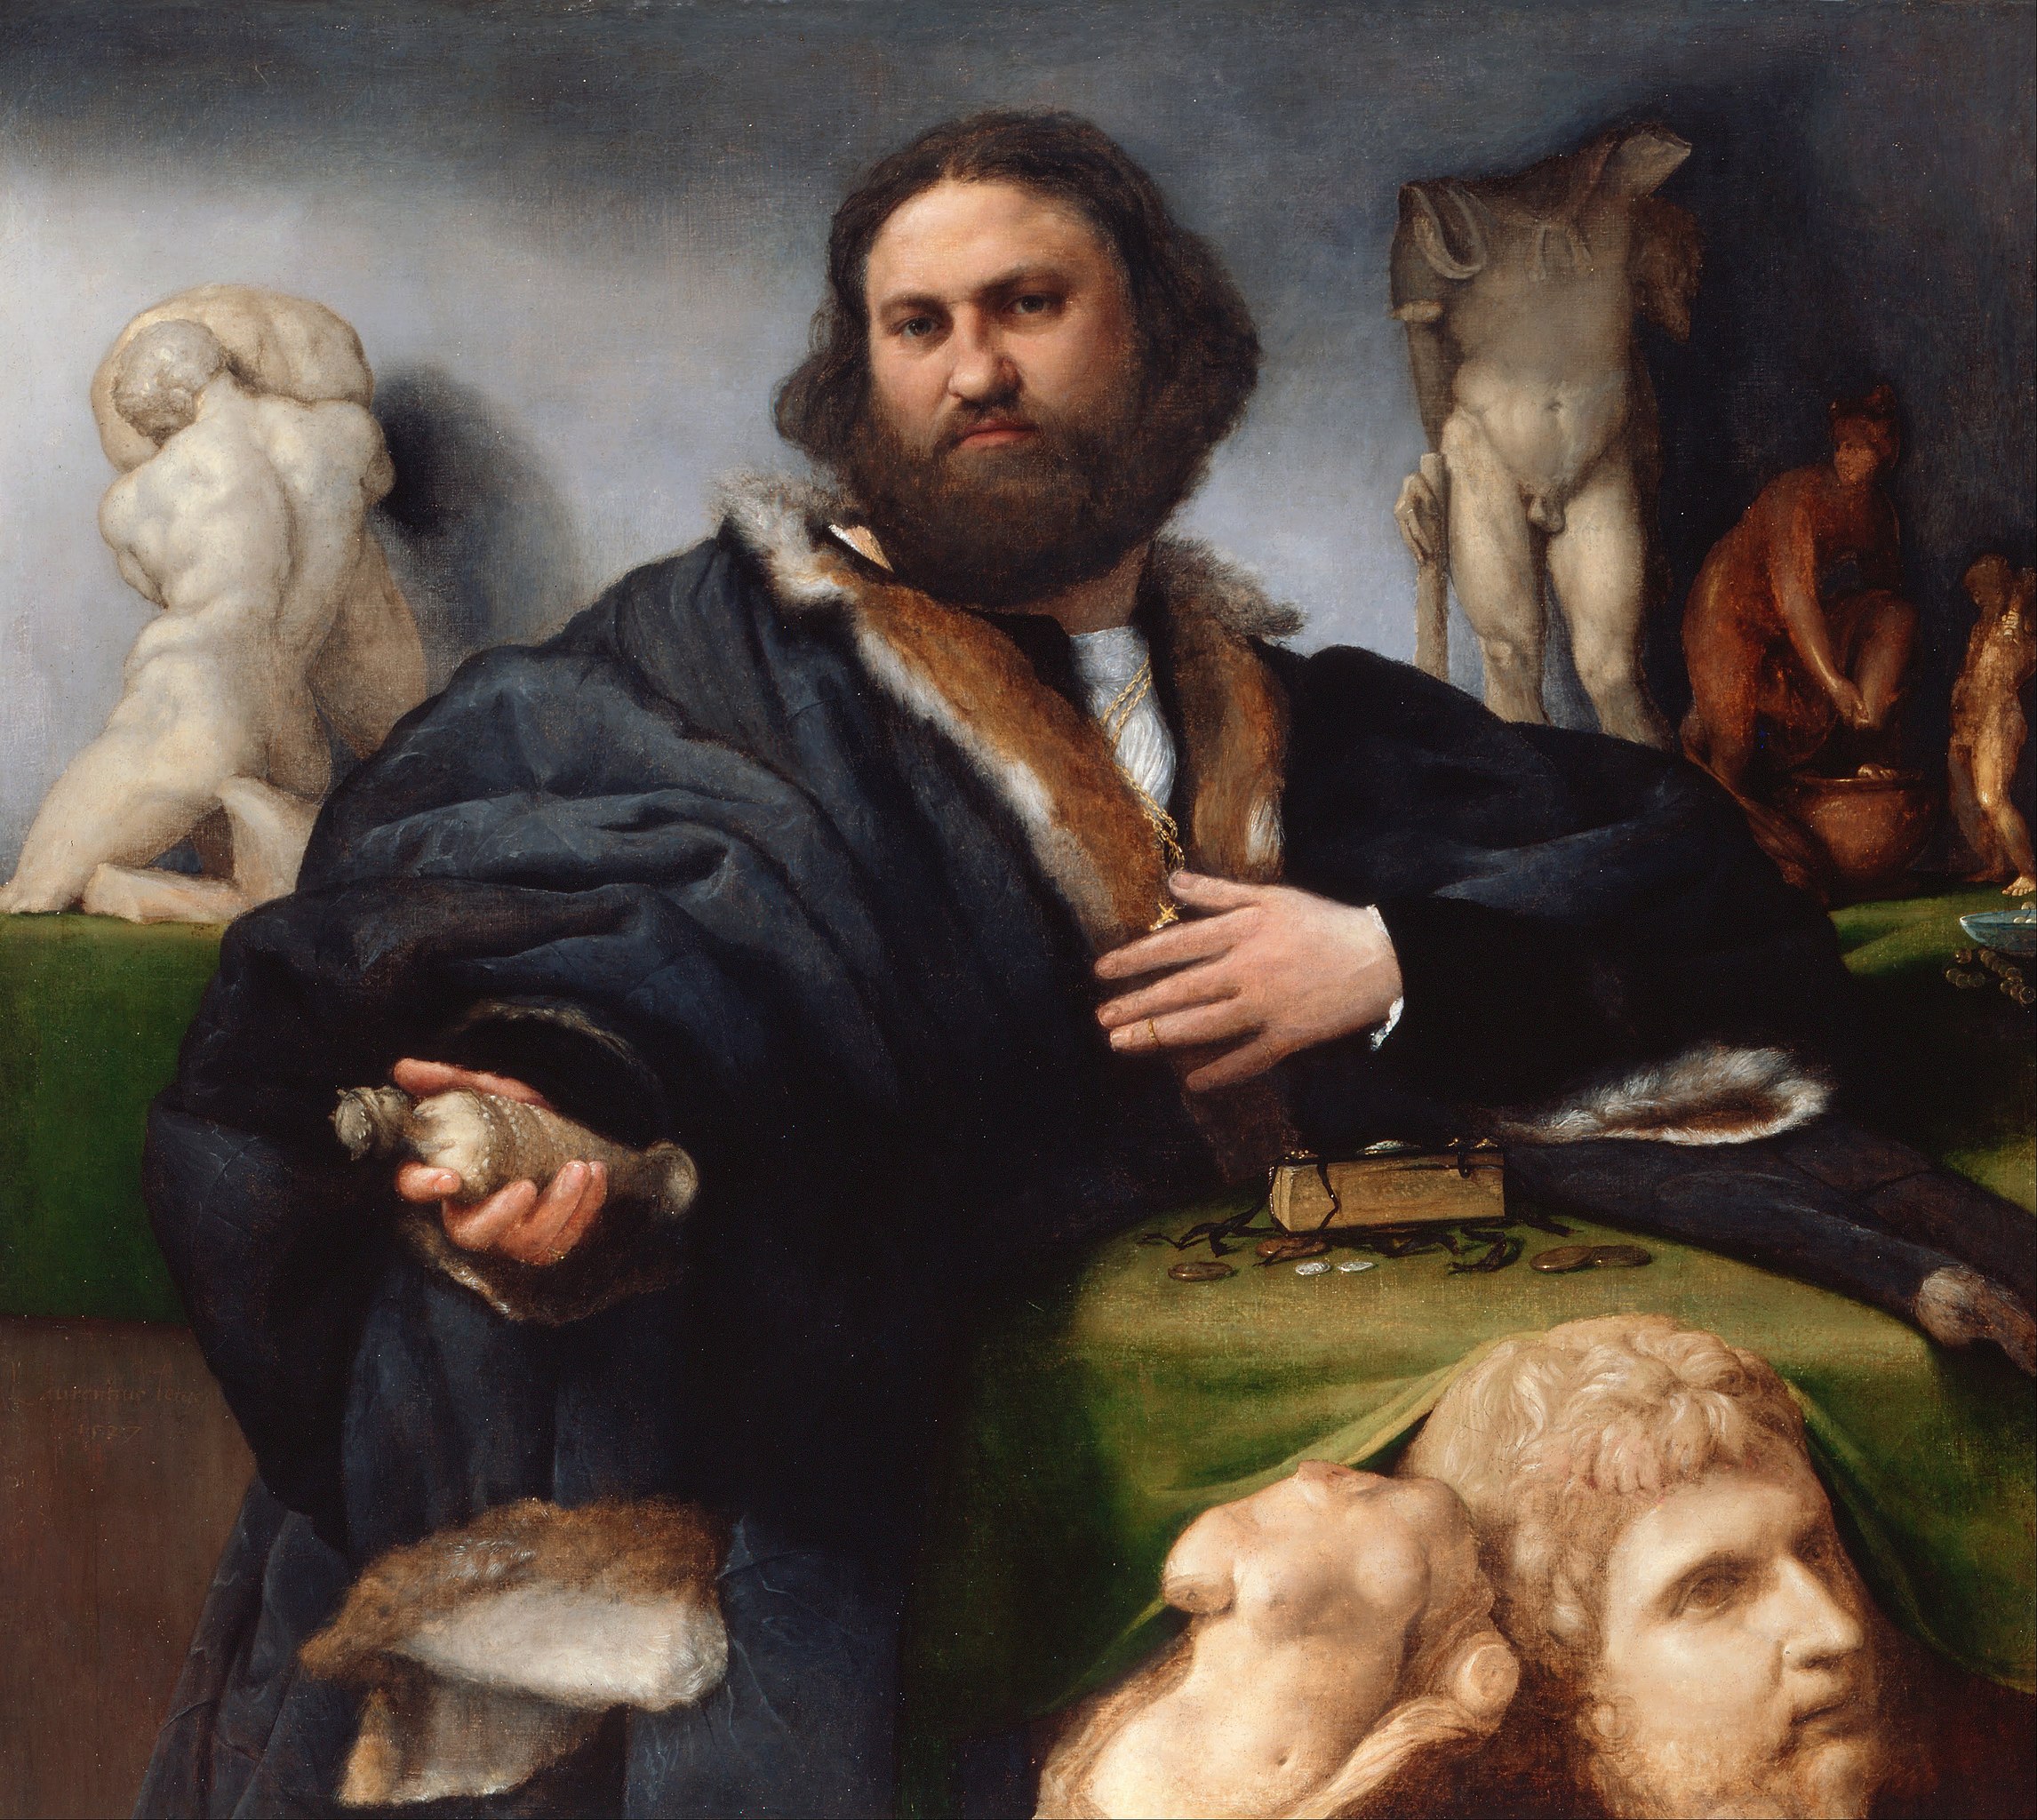 Andrea Odoni by Lorenzo Lotto - 1525 - 104.3 x 116.8 cm Royal Collection Trust